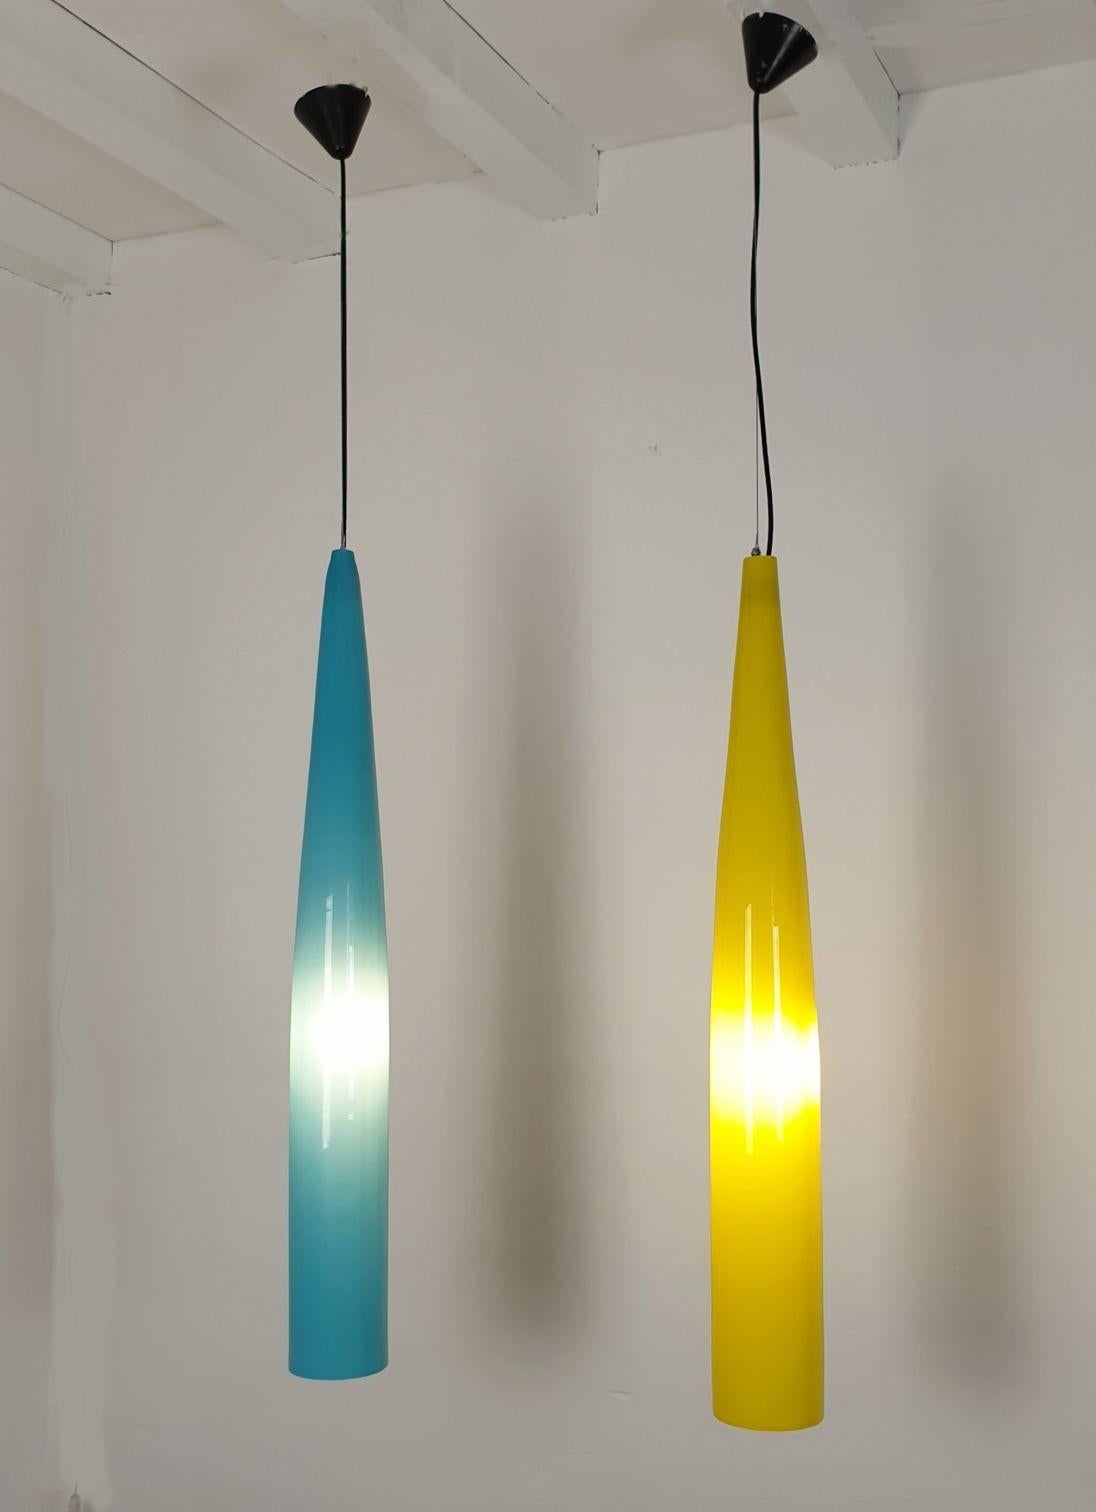 Tall glass pendants by Alessandro Pianon for Vistosi - a pair In Excellent Condition For Sale In Dallas, TX